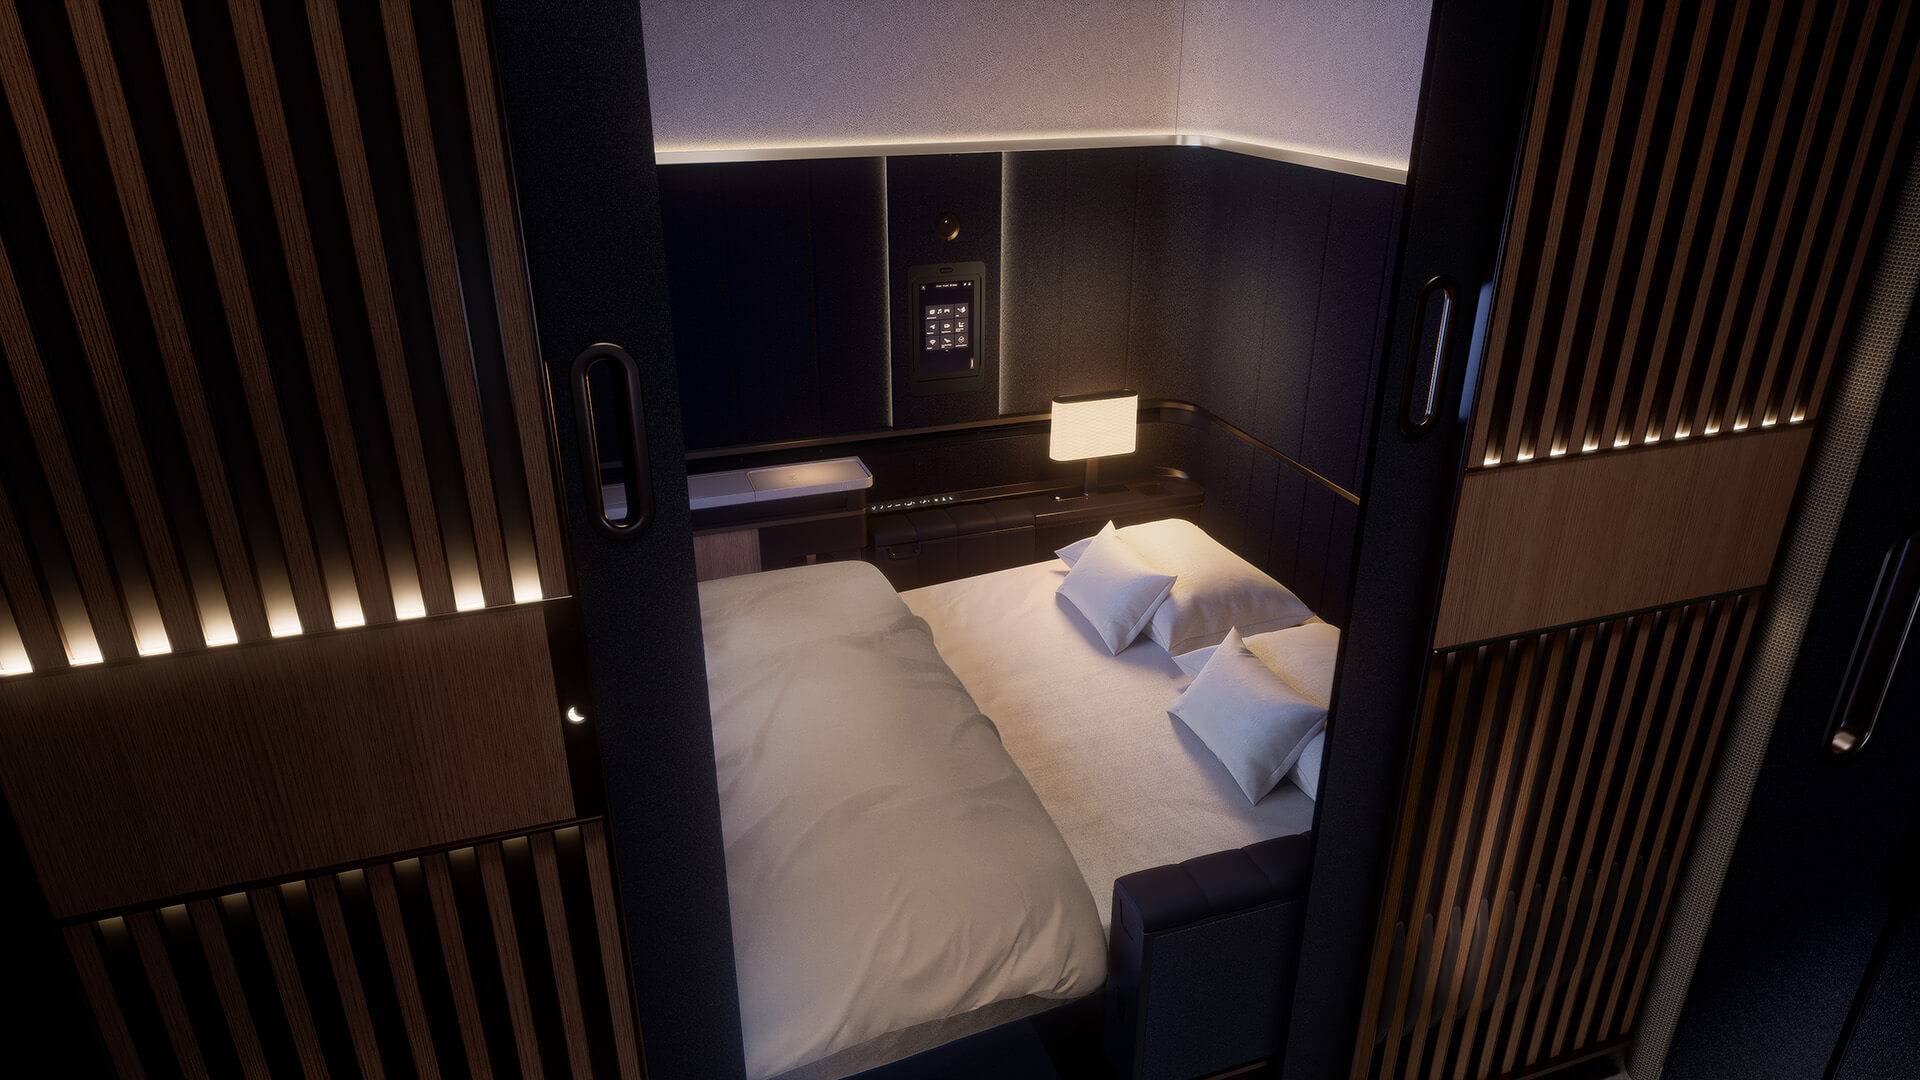 View of the Lufthansa A350 First Class Suite with the bedmode active